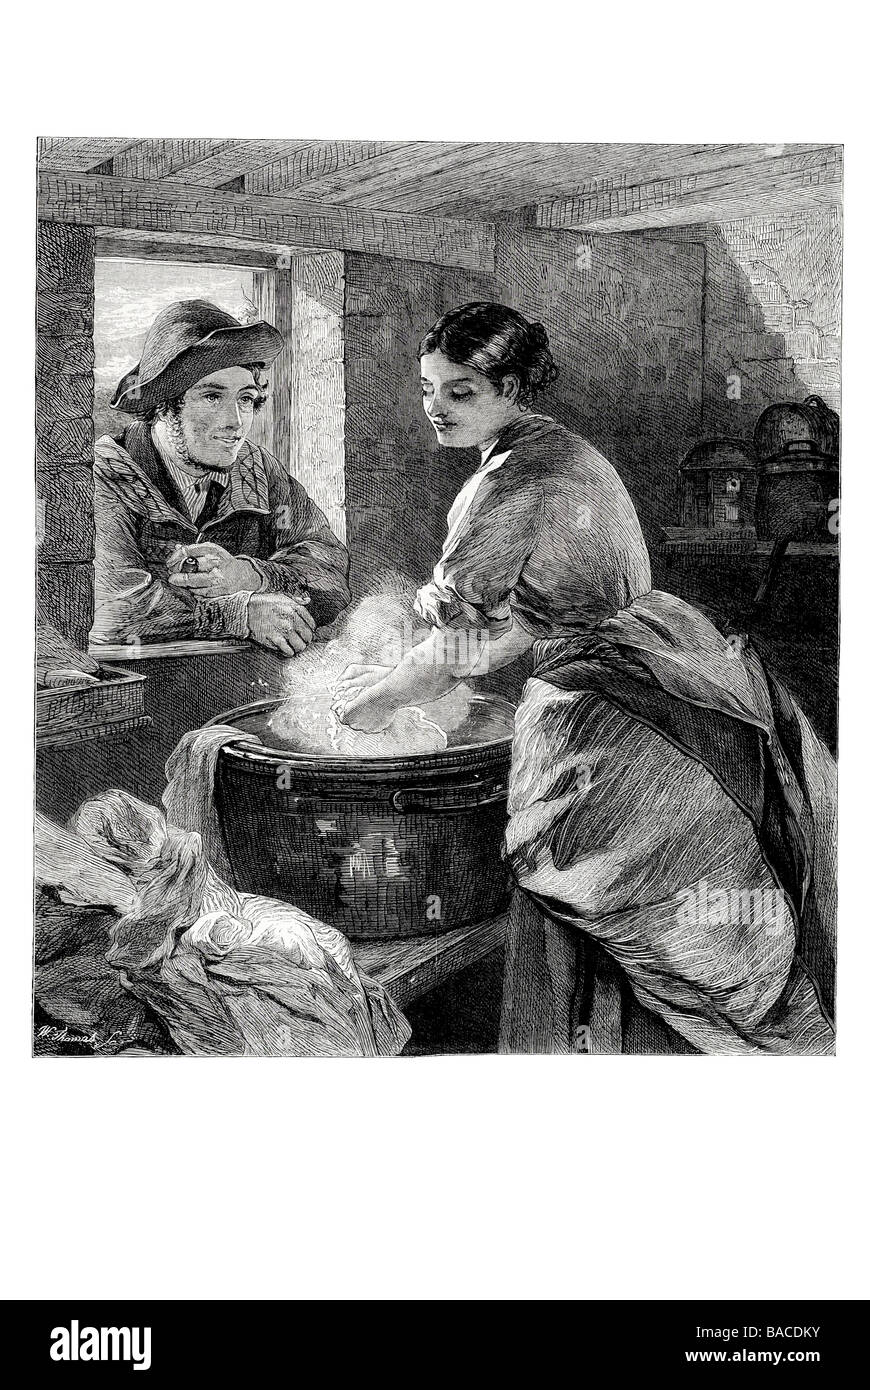 rustic courtship by w lucas 1865 dates engagement public affair wooing washing window cleaning shy talking Stock Photo